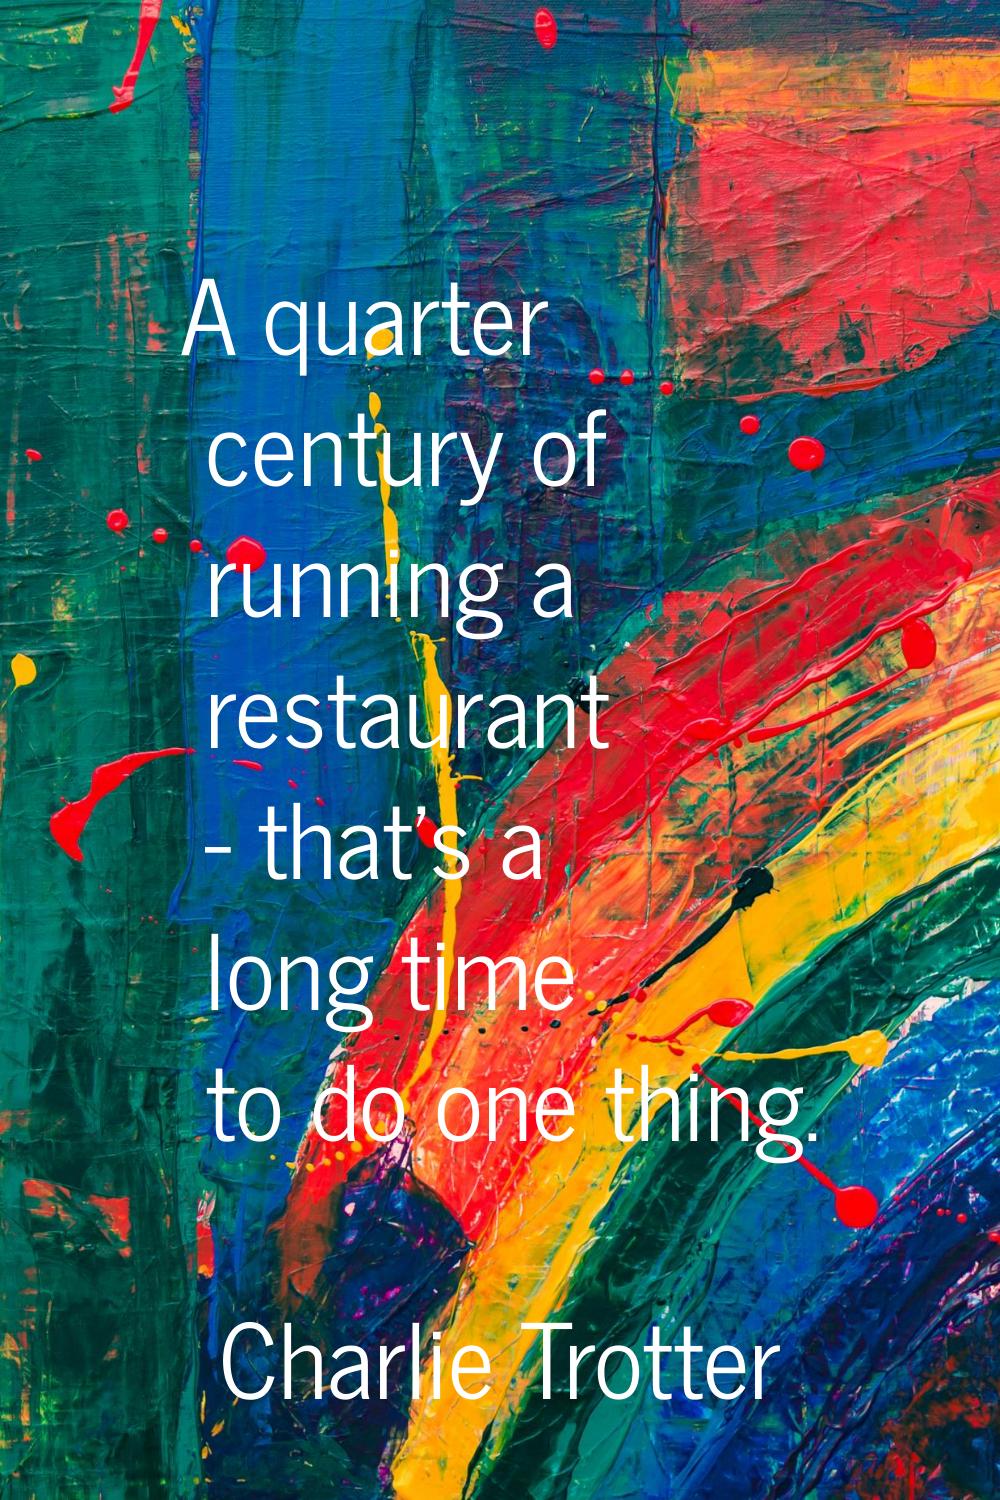 A quarter century of running a restaurant - that's a long time to do one thing.